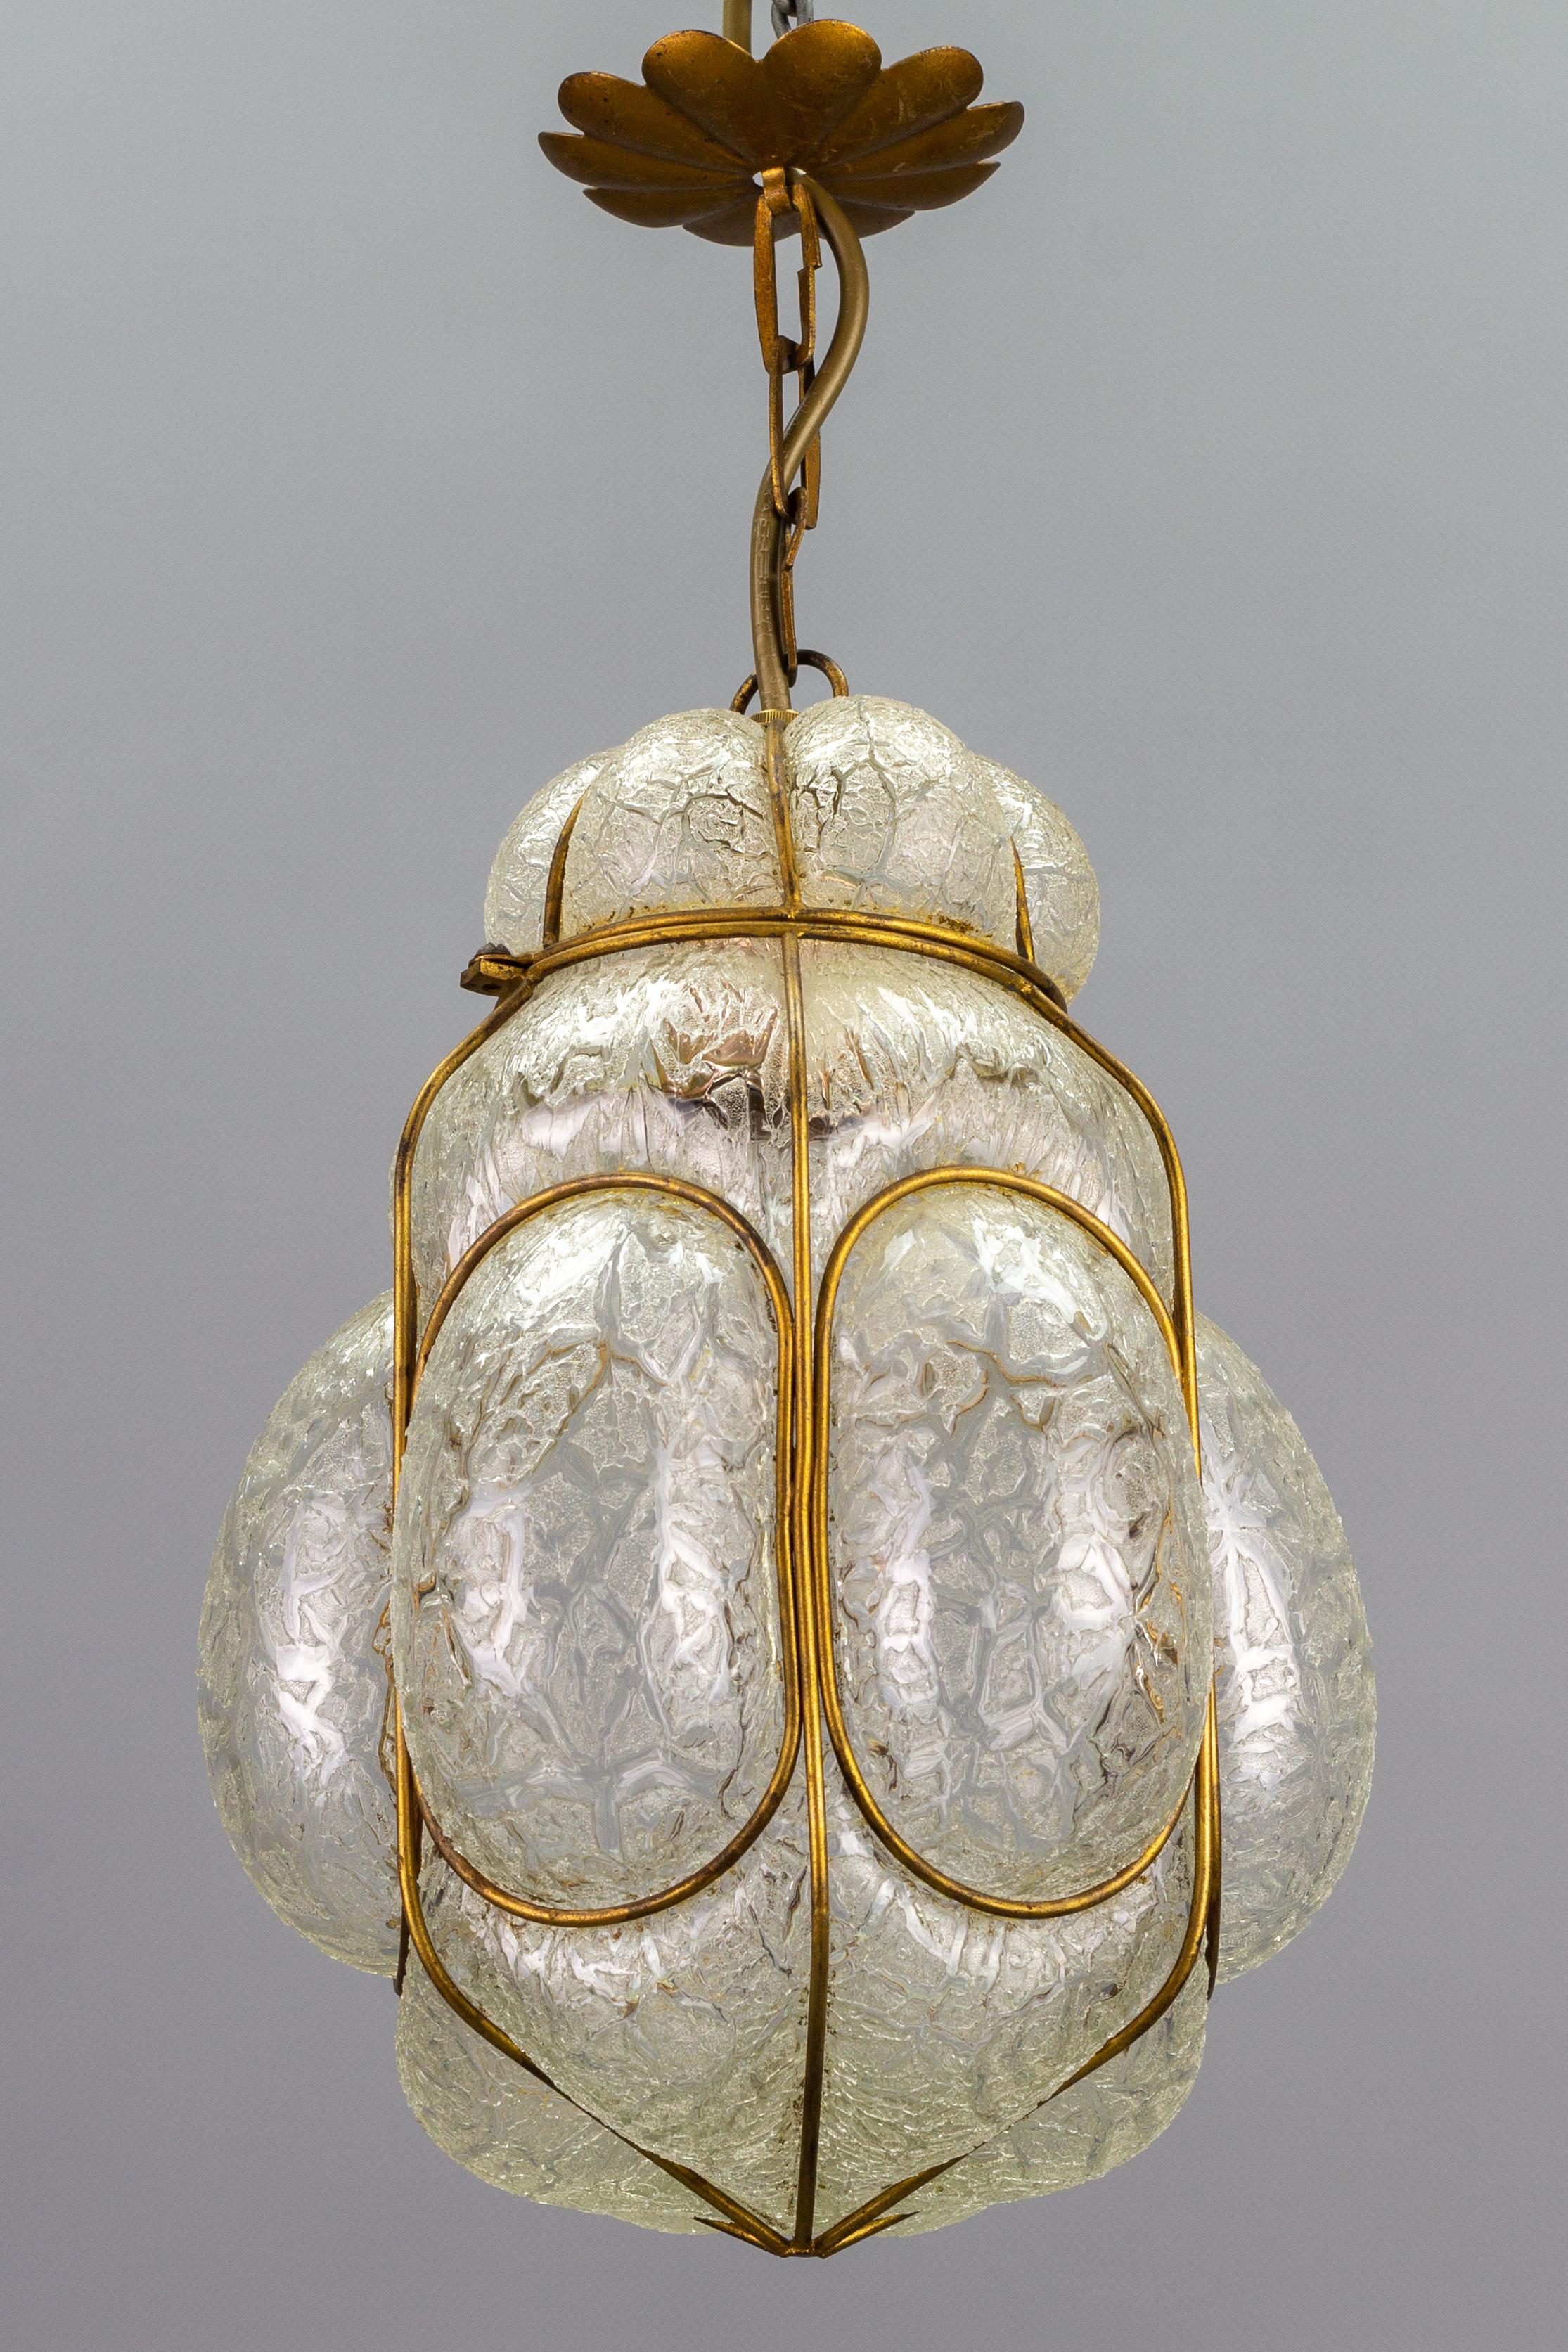 This beautiful Murano Seguso style Venetian pendant lamp or lantern features hand-blown granite texture glass in frosted white and clear tones with a decorative golden iron cage.
One socket for E27 (E26) size light bulb.
Dimensions: Height: 40 cm